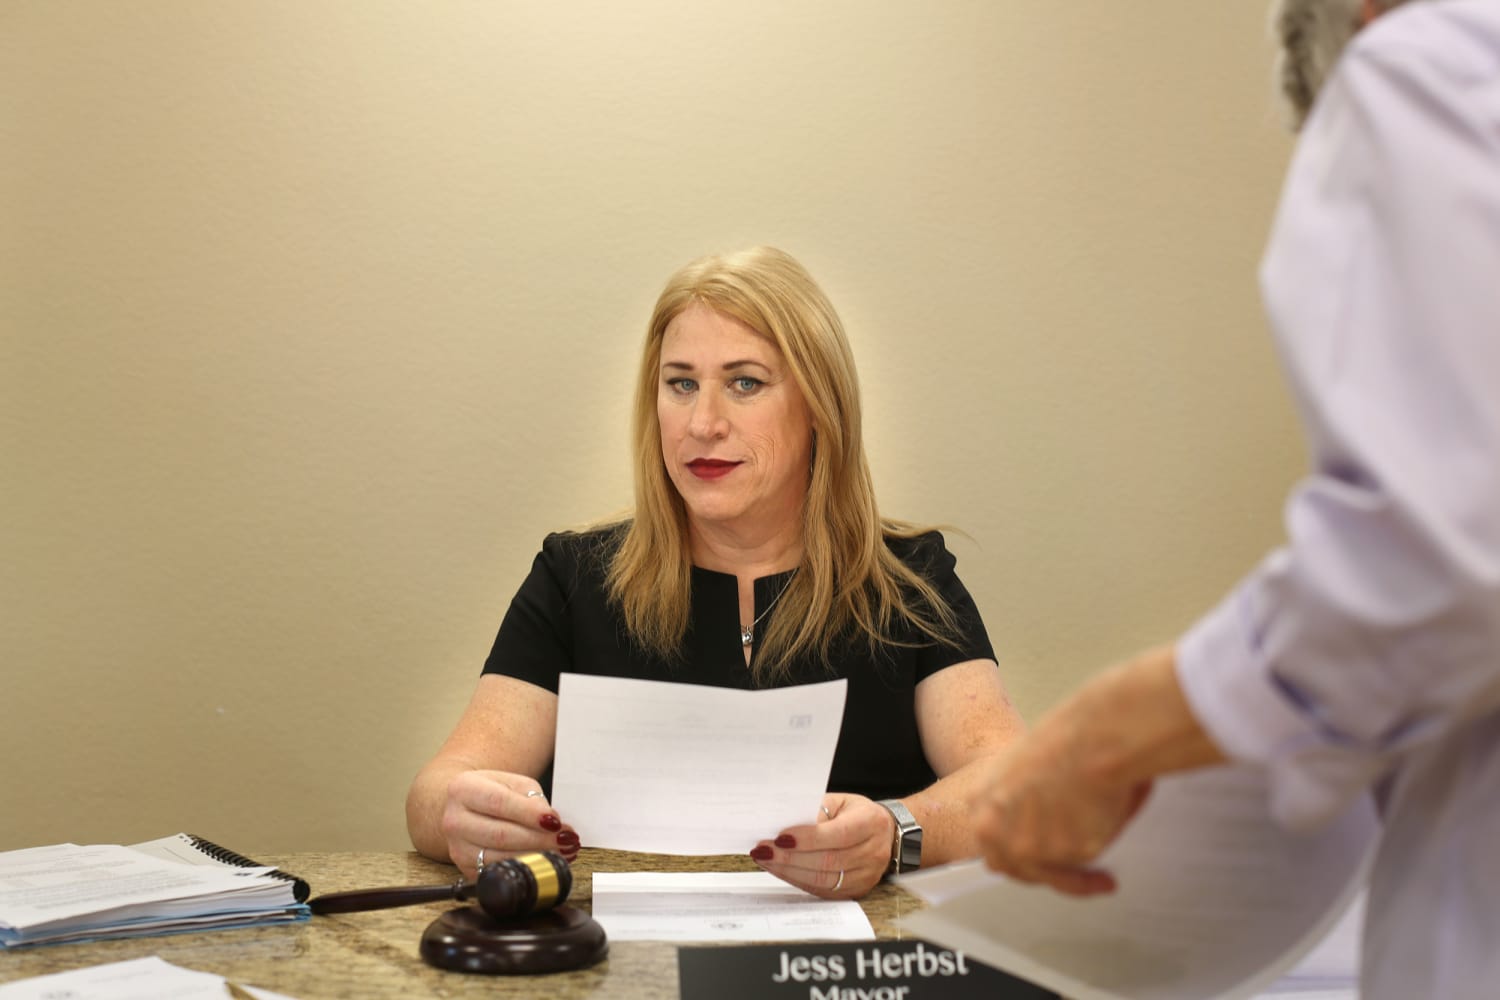 Jess Herbst, first openly transgender mayor in Texas, is voted out